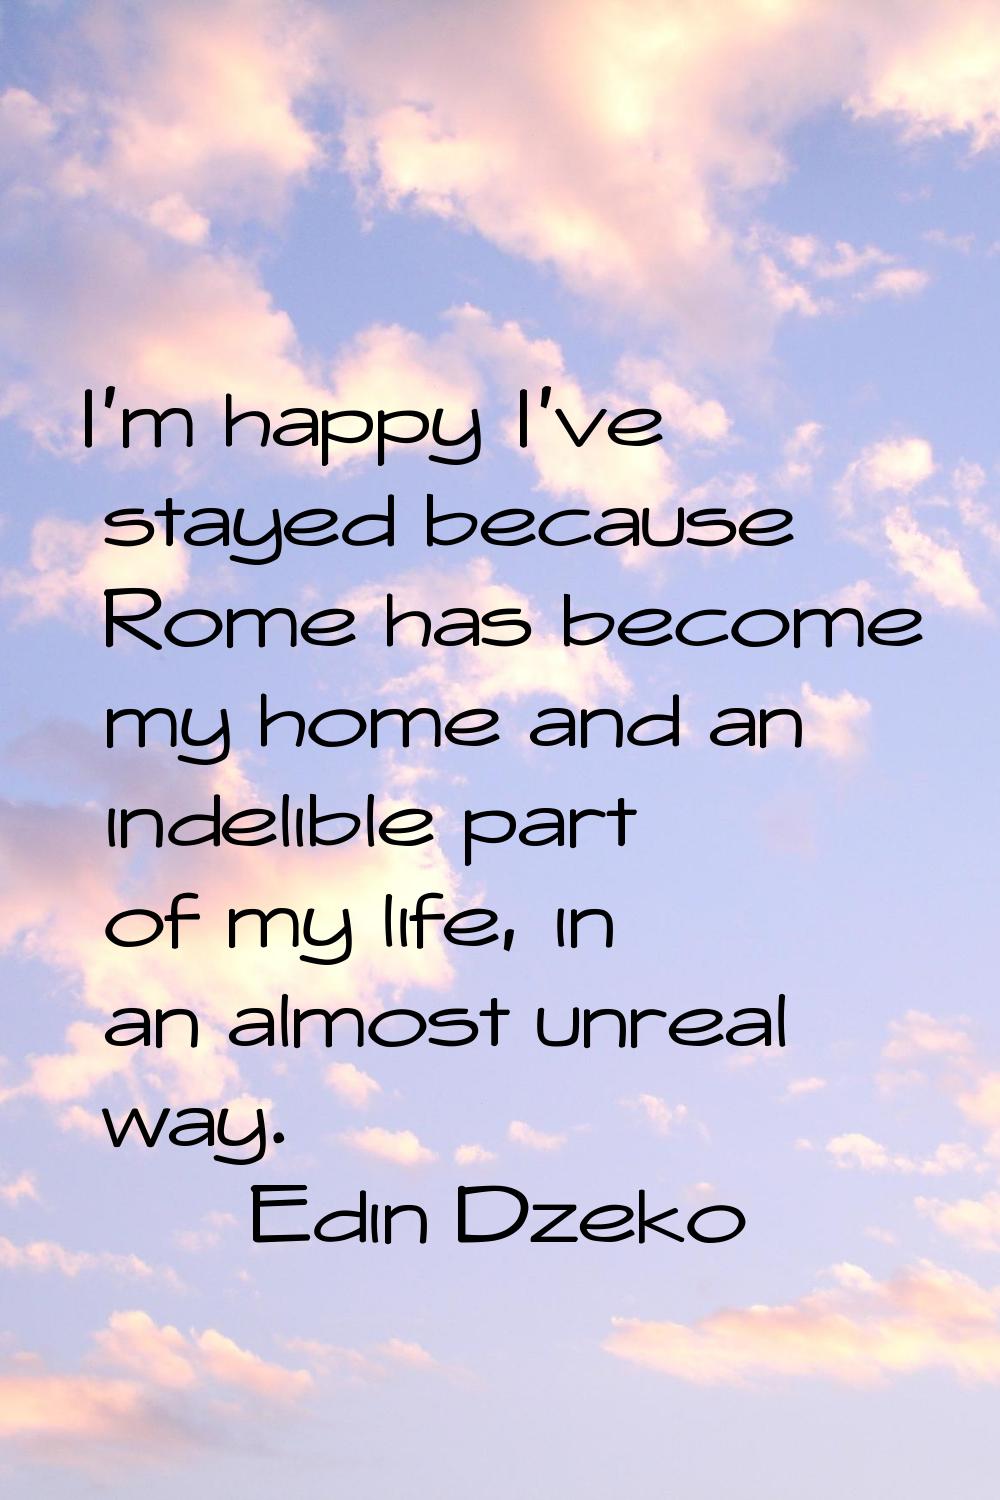 I'm happy I've stayed because Rome has become my home and an indelible part of my life, in an almos